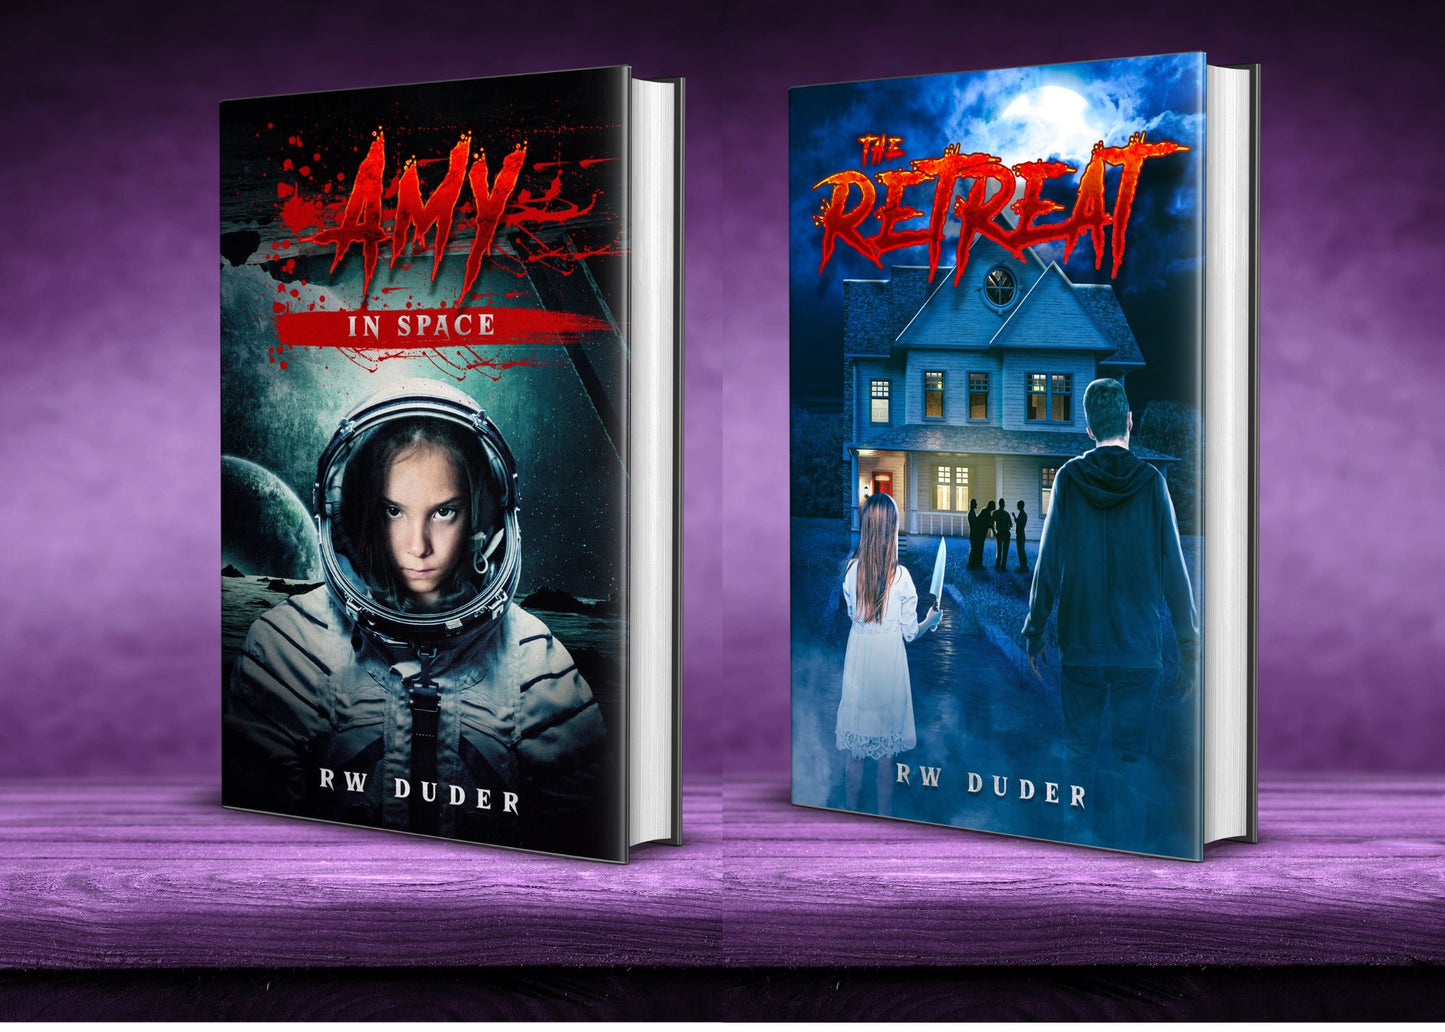 Amy in Space | The Retreat (Signed double pack)